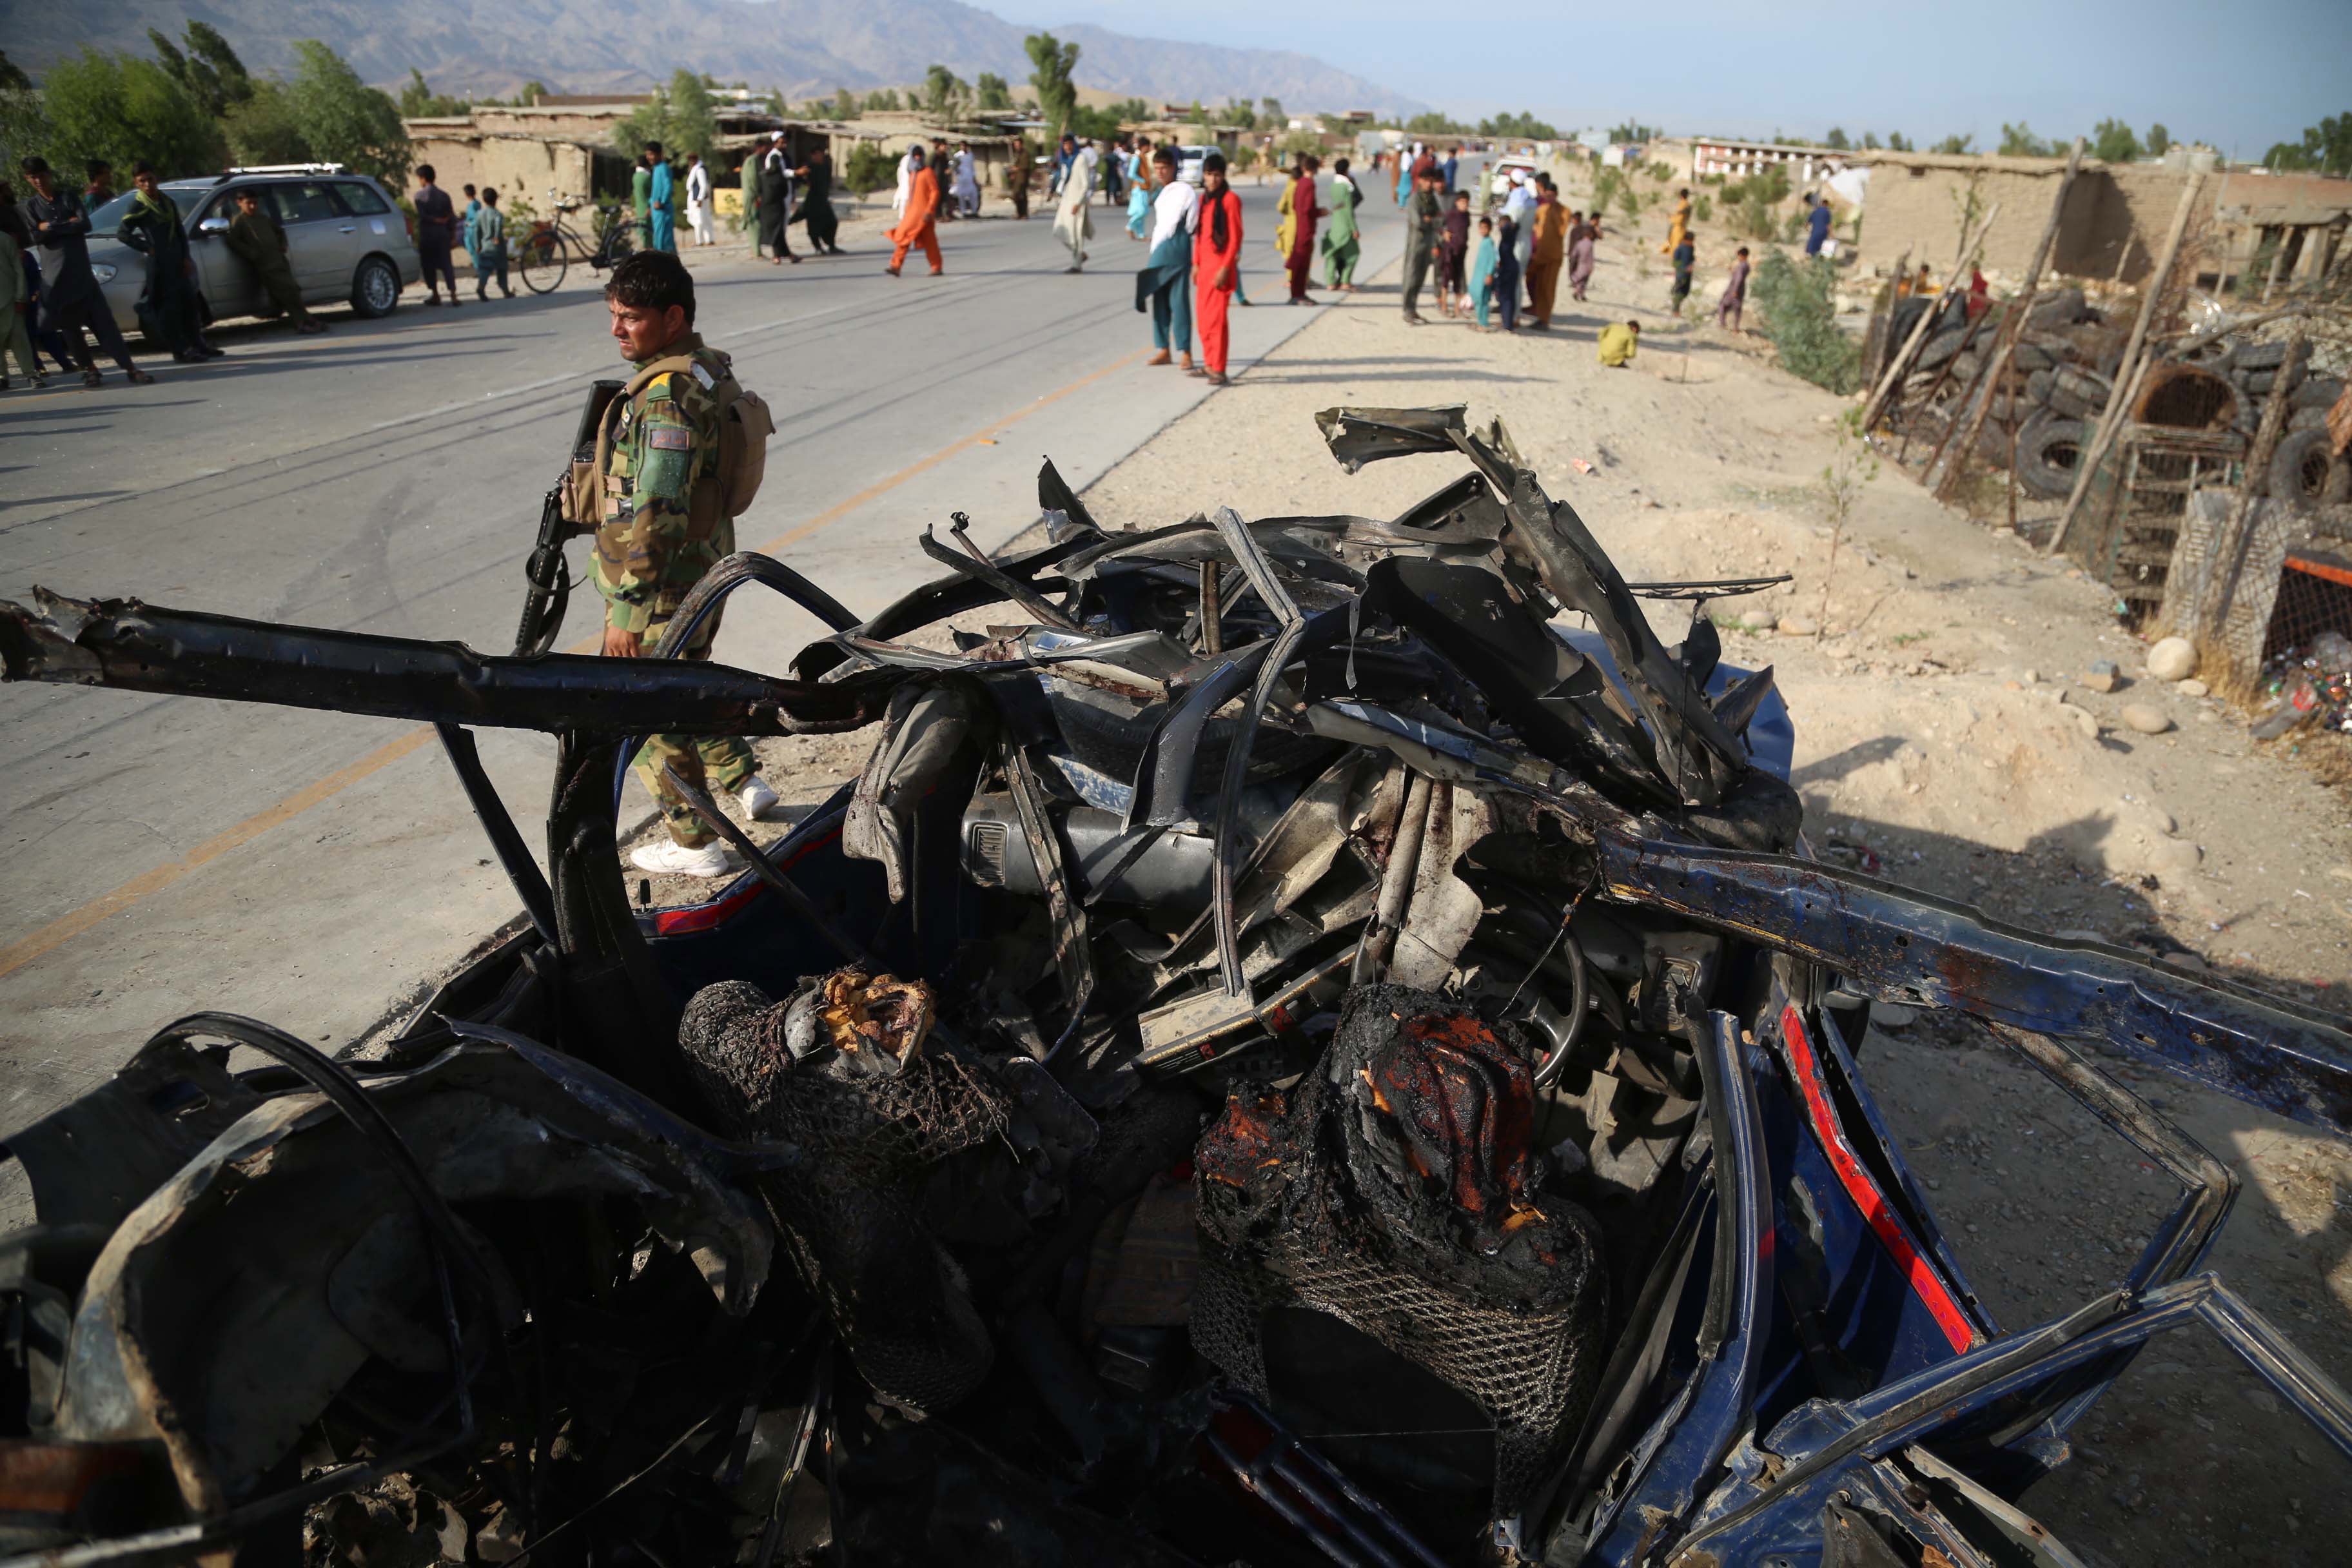 Afghan security officials inspect the scene of a roadside bomb blast that killed six civilians on the outskirts of Jalalabad, Afghanistan